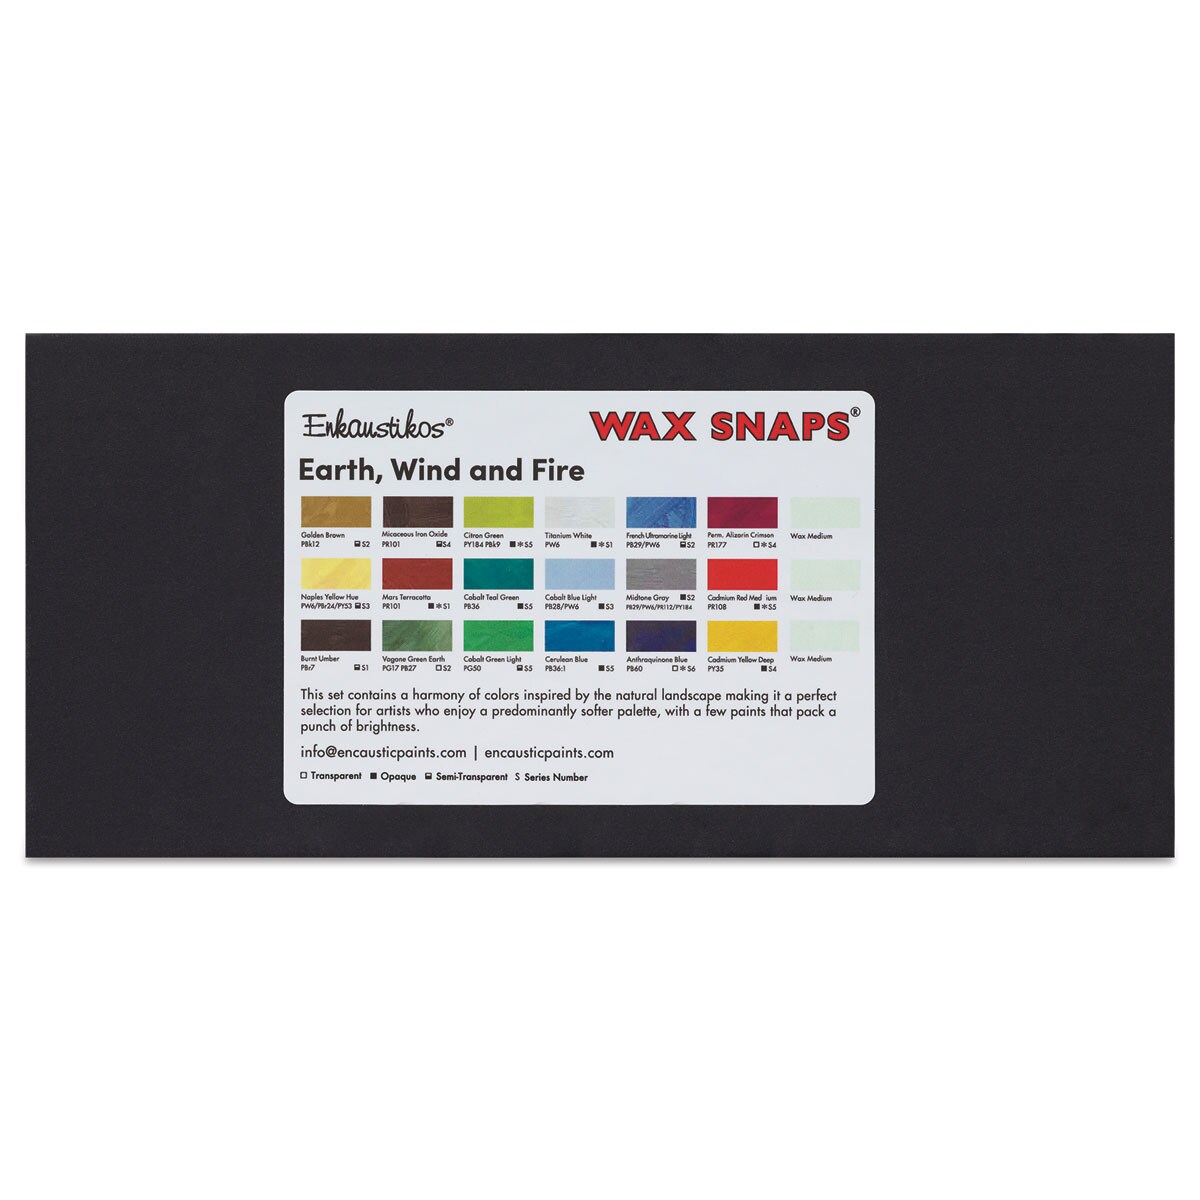 Enkaustikos Wax Snaps Encaustic Paints - Earth, Wind, and Fire Set